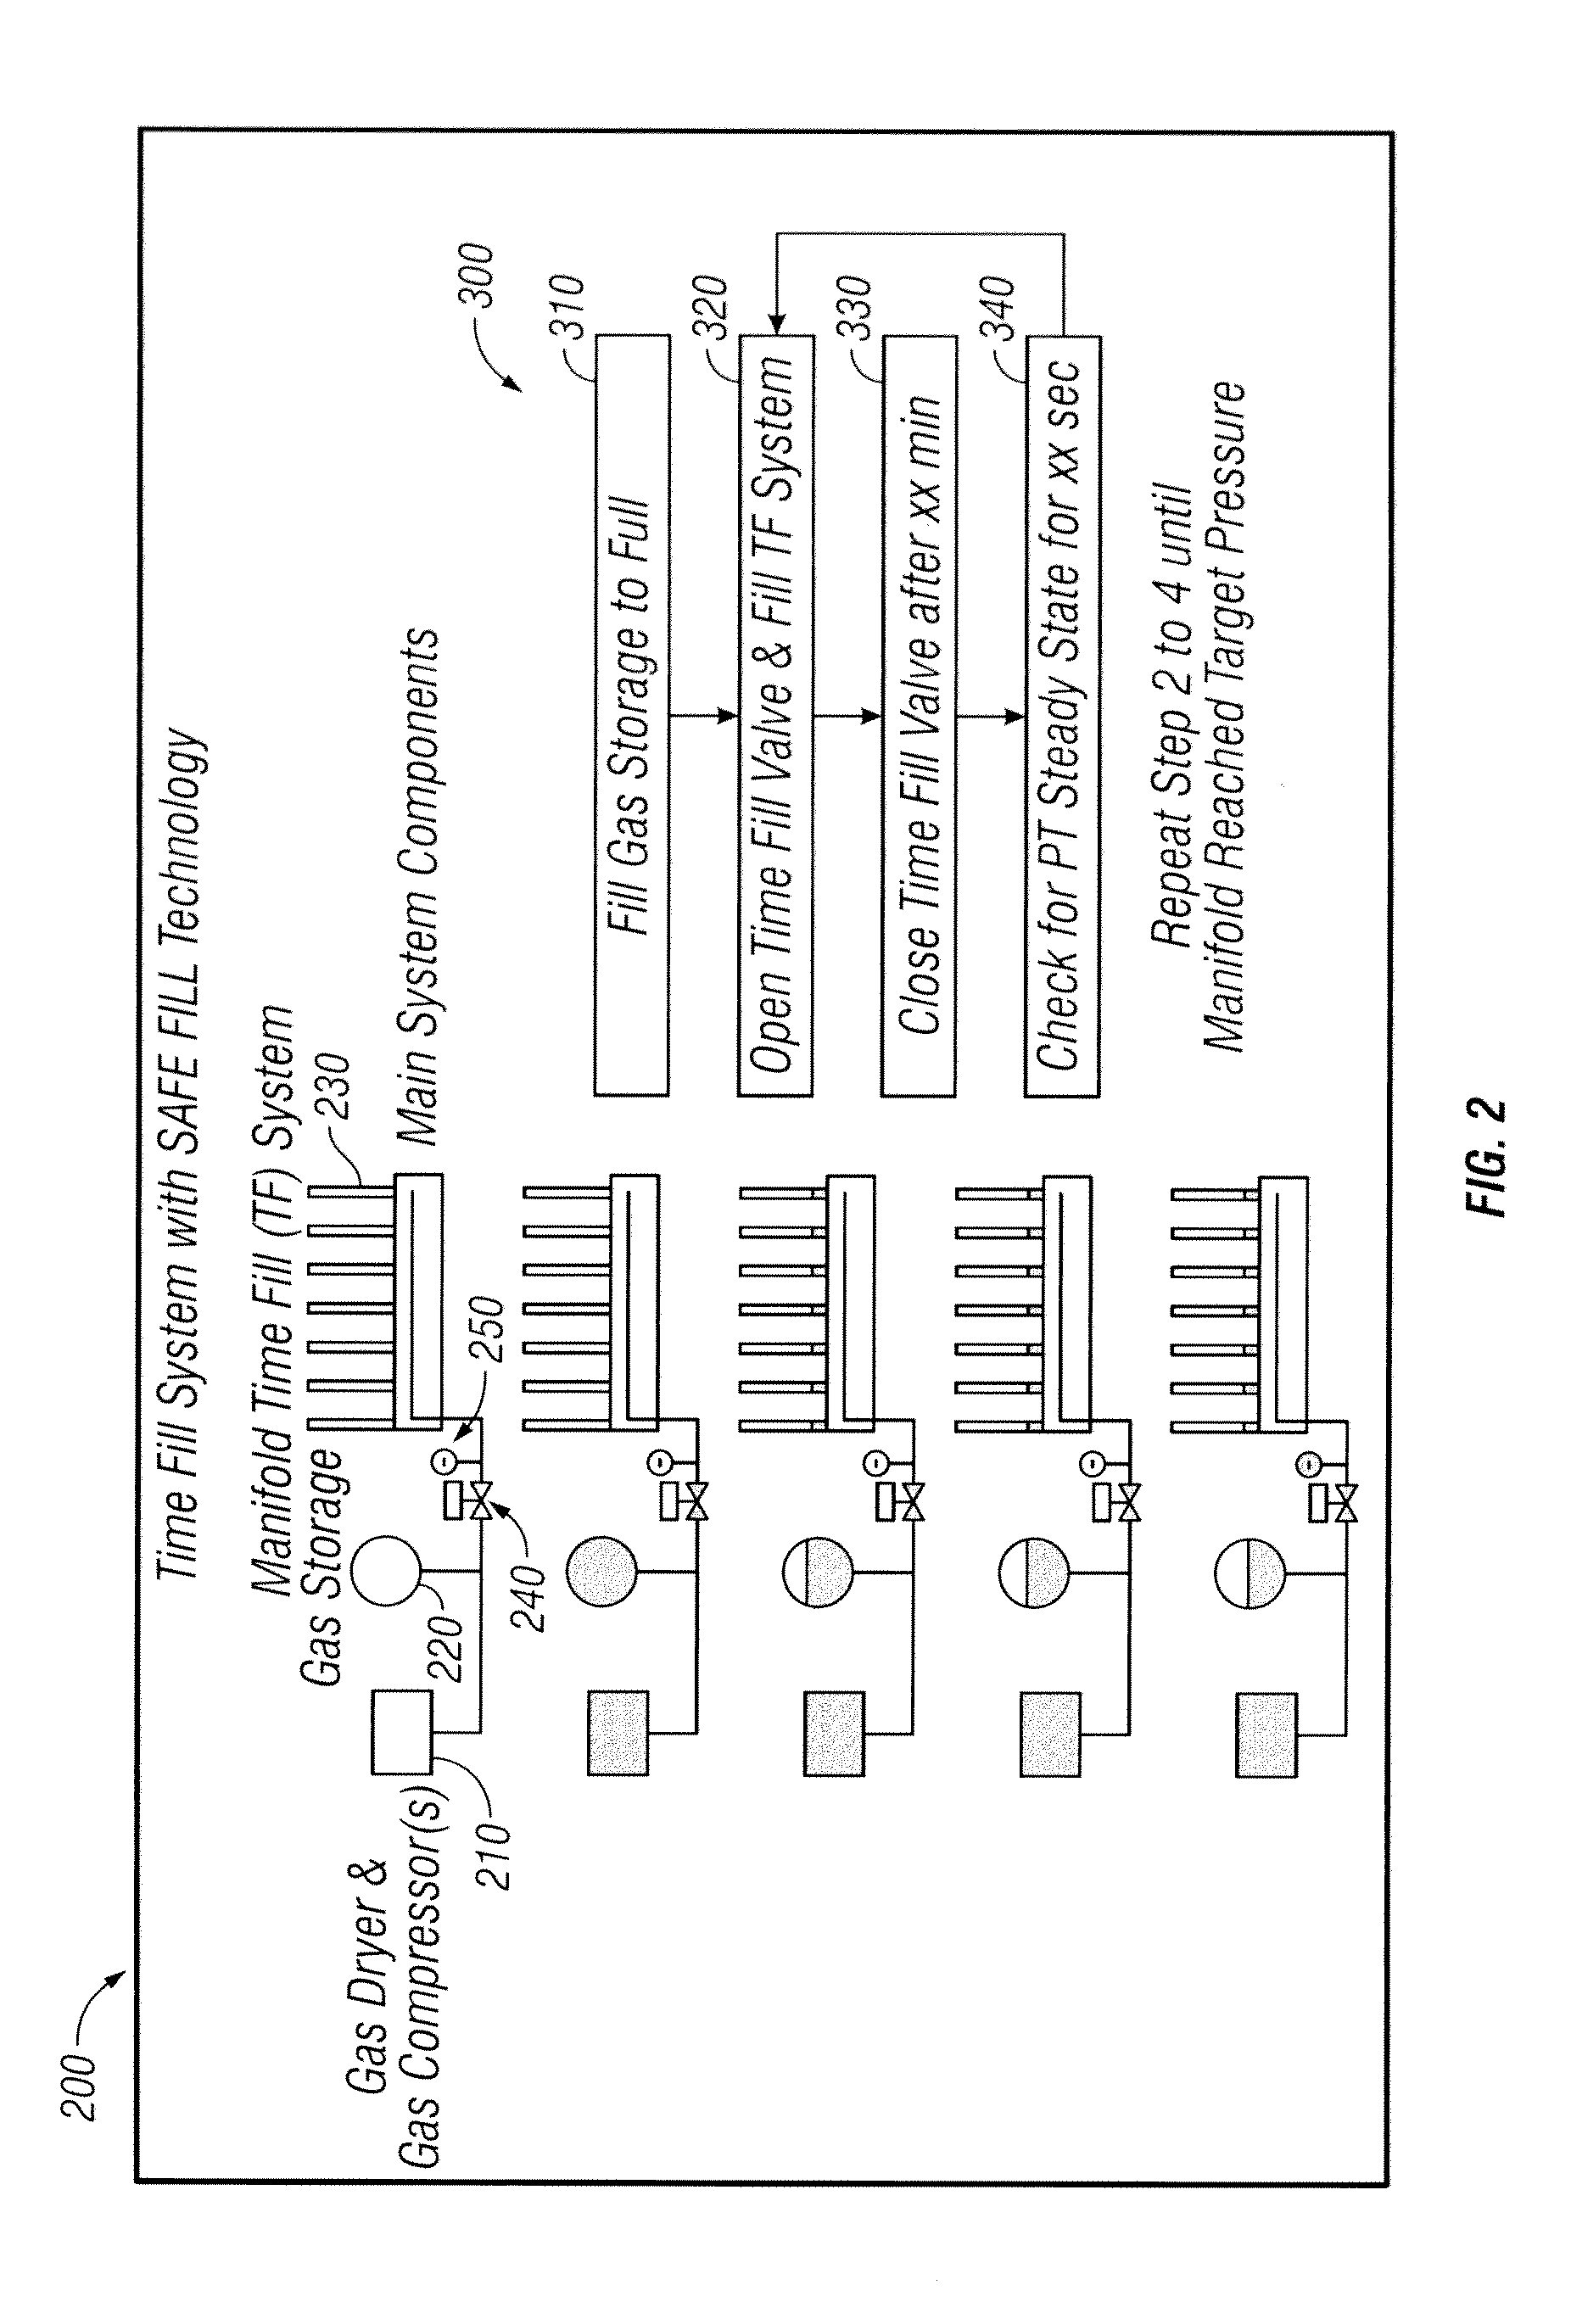 Cng time fill system and method with safe fill technology